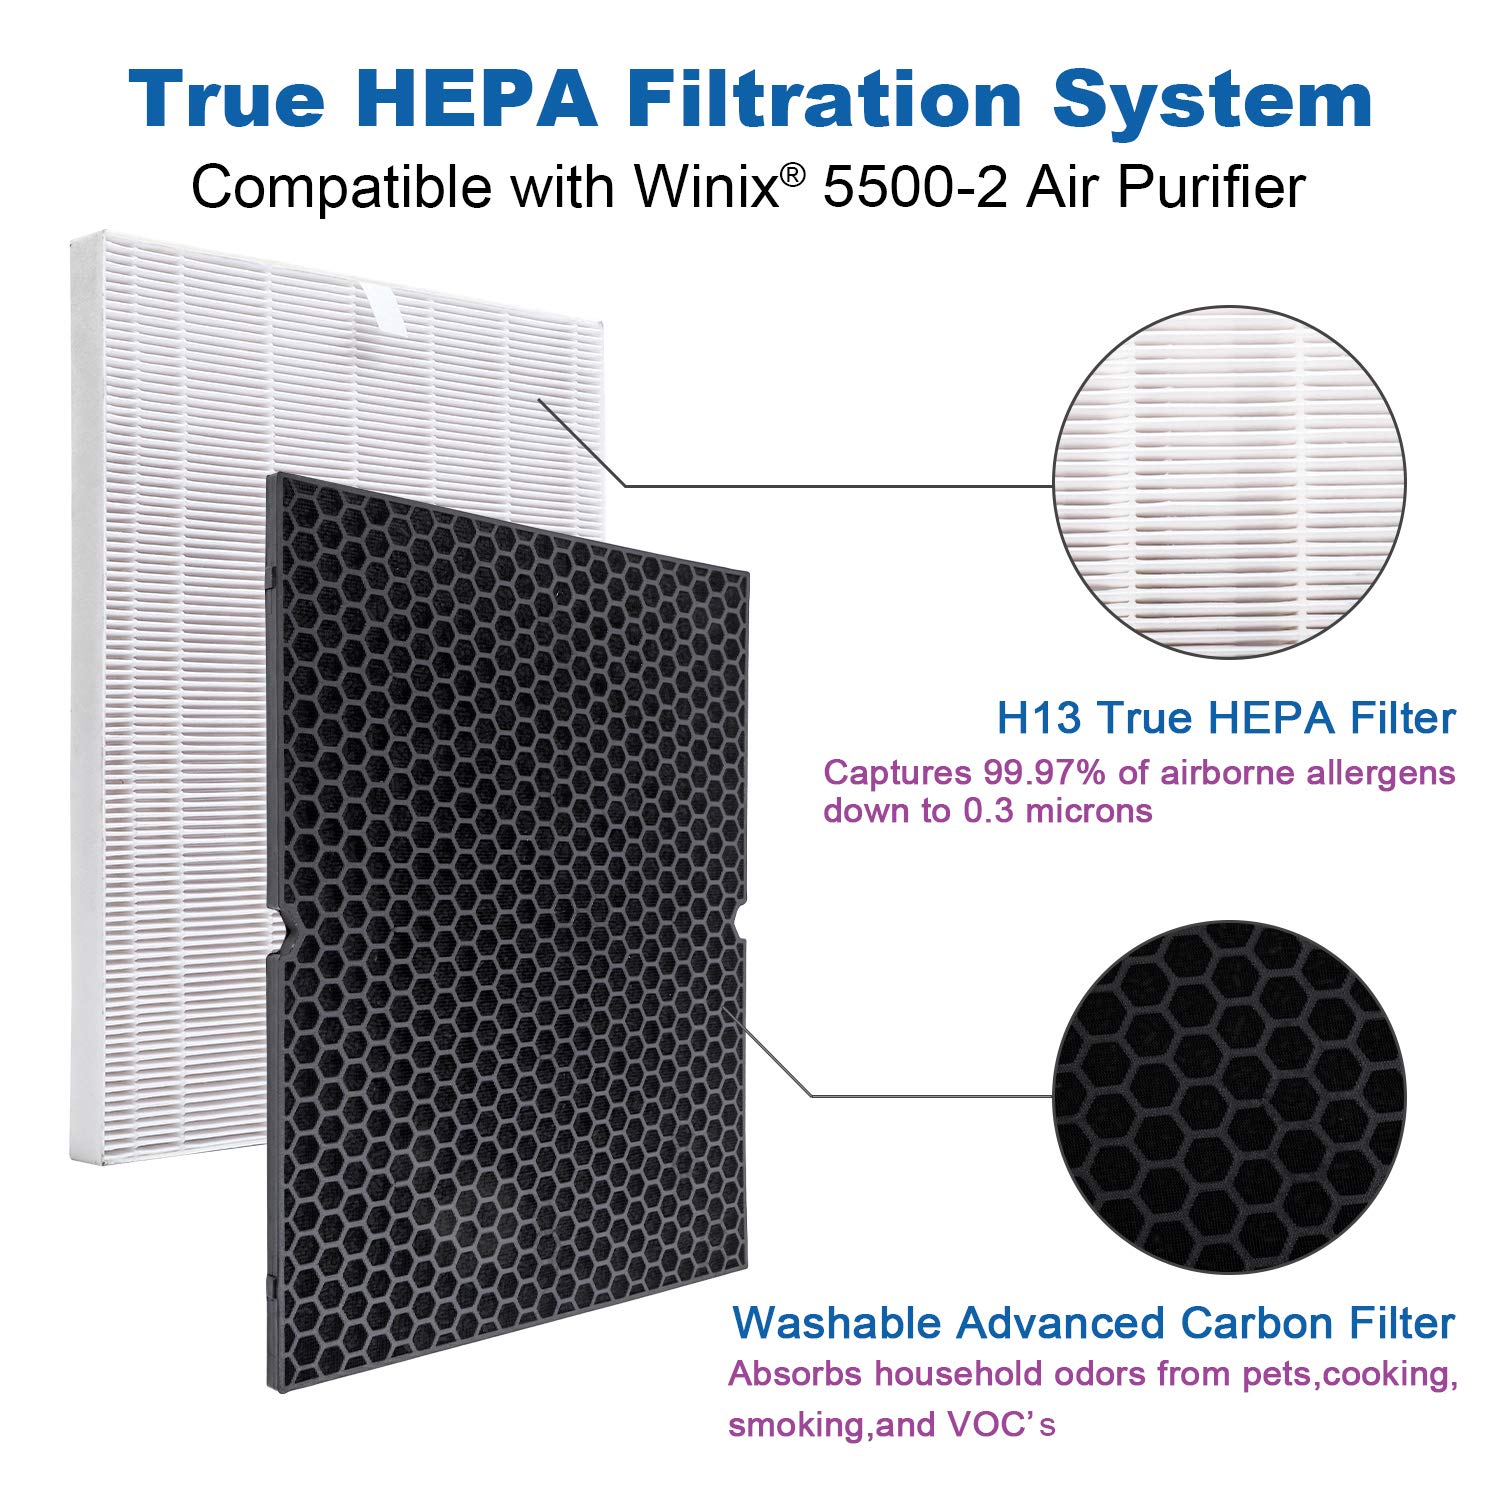 Flintar 116130 True HEPA Replacement Filter H, Compatible with Winix 5500-2 Air Purifier, Premium H13 Grade True HEPA and Washable Advanced Carbon Filter, Part # 116130, H Filter, 2-Pack